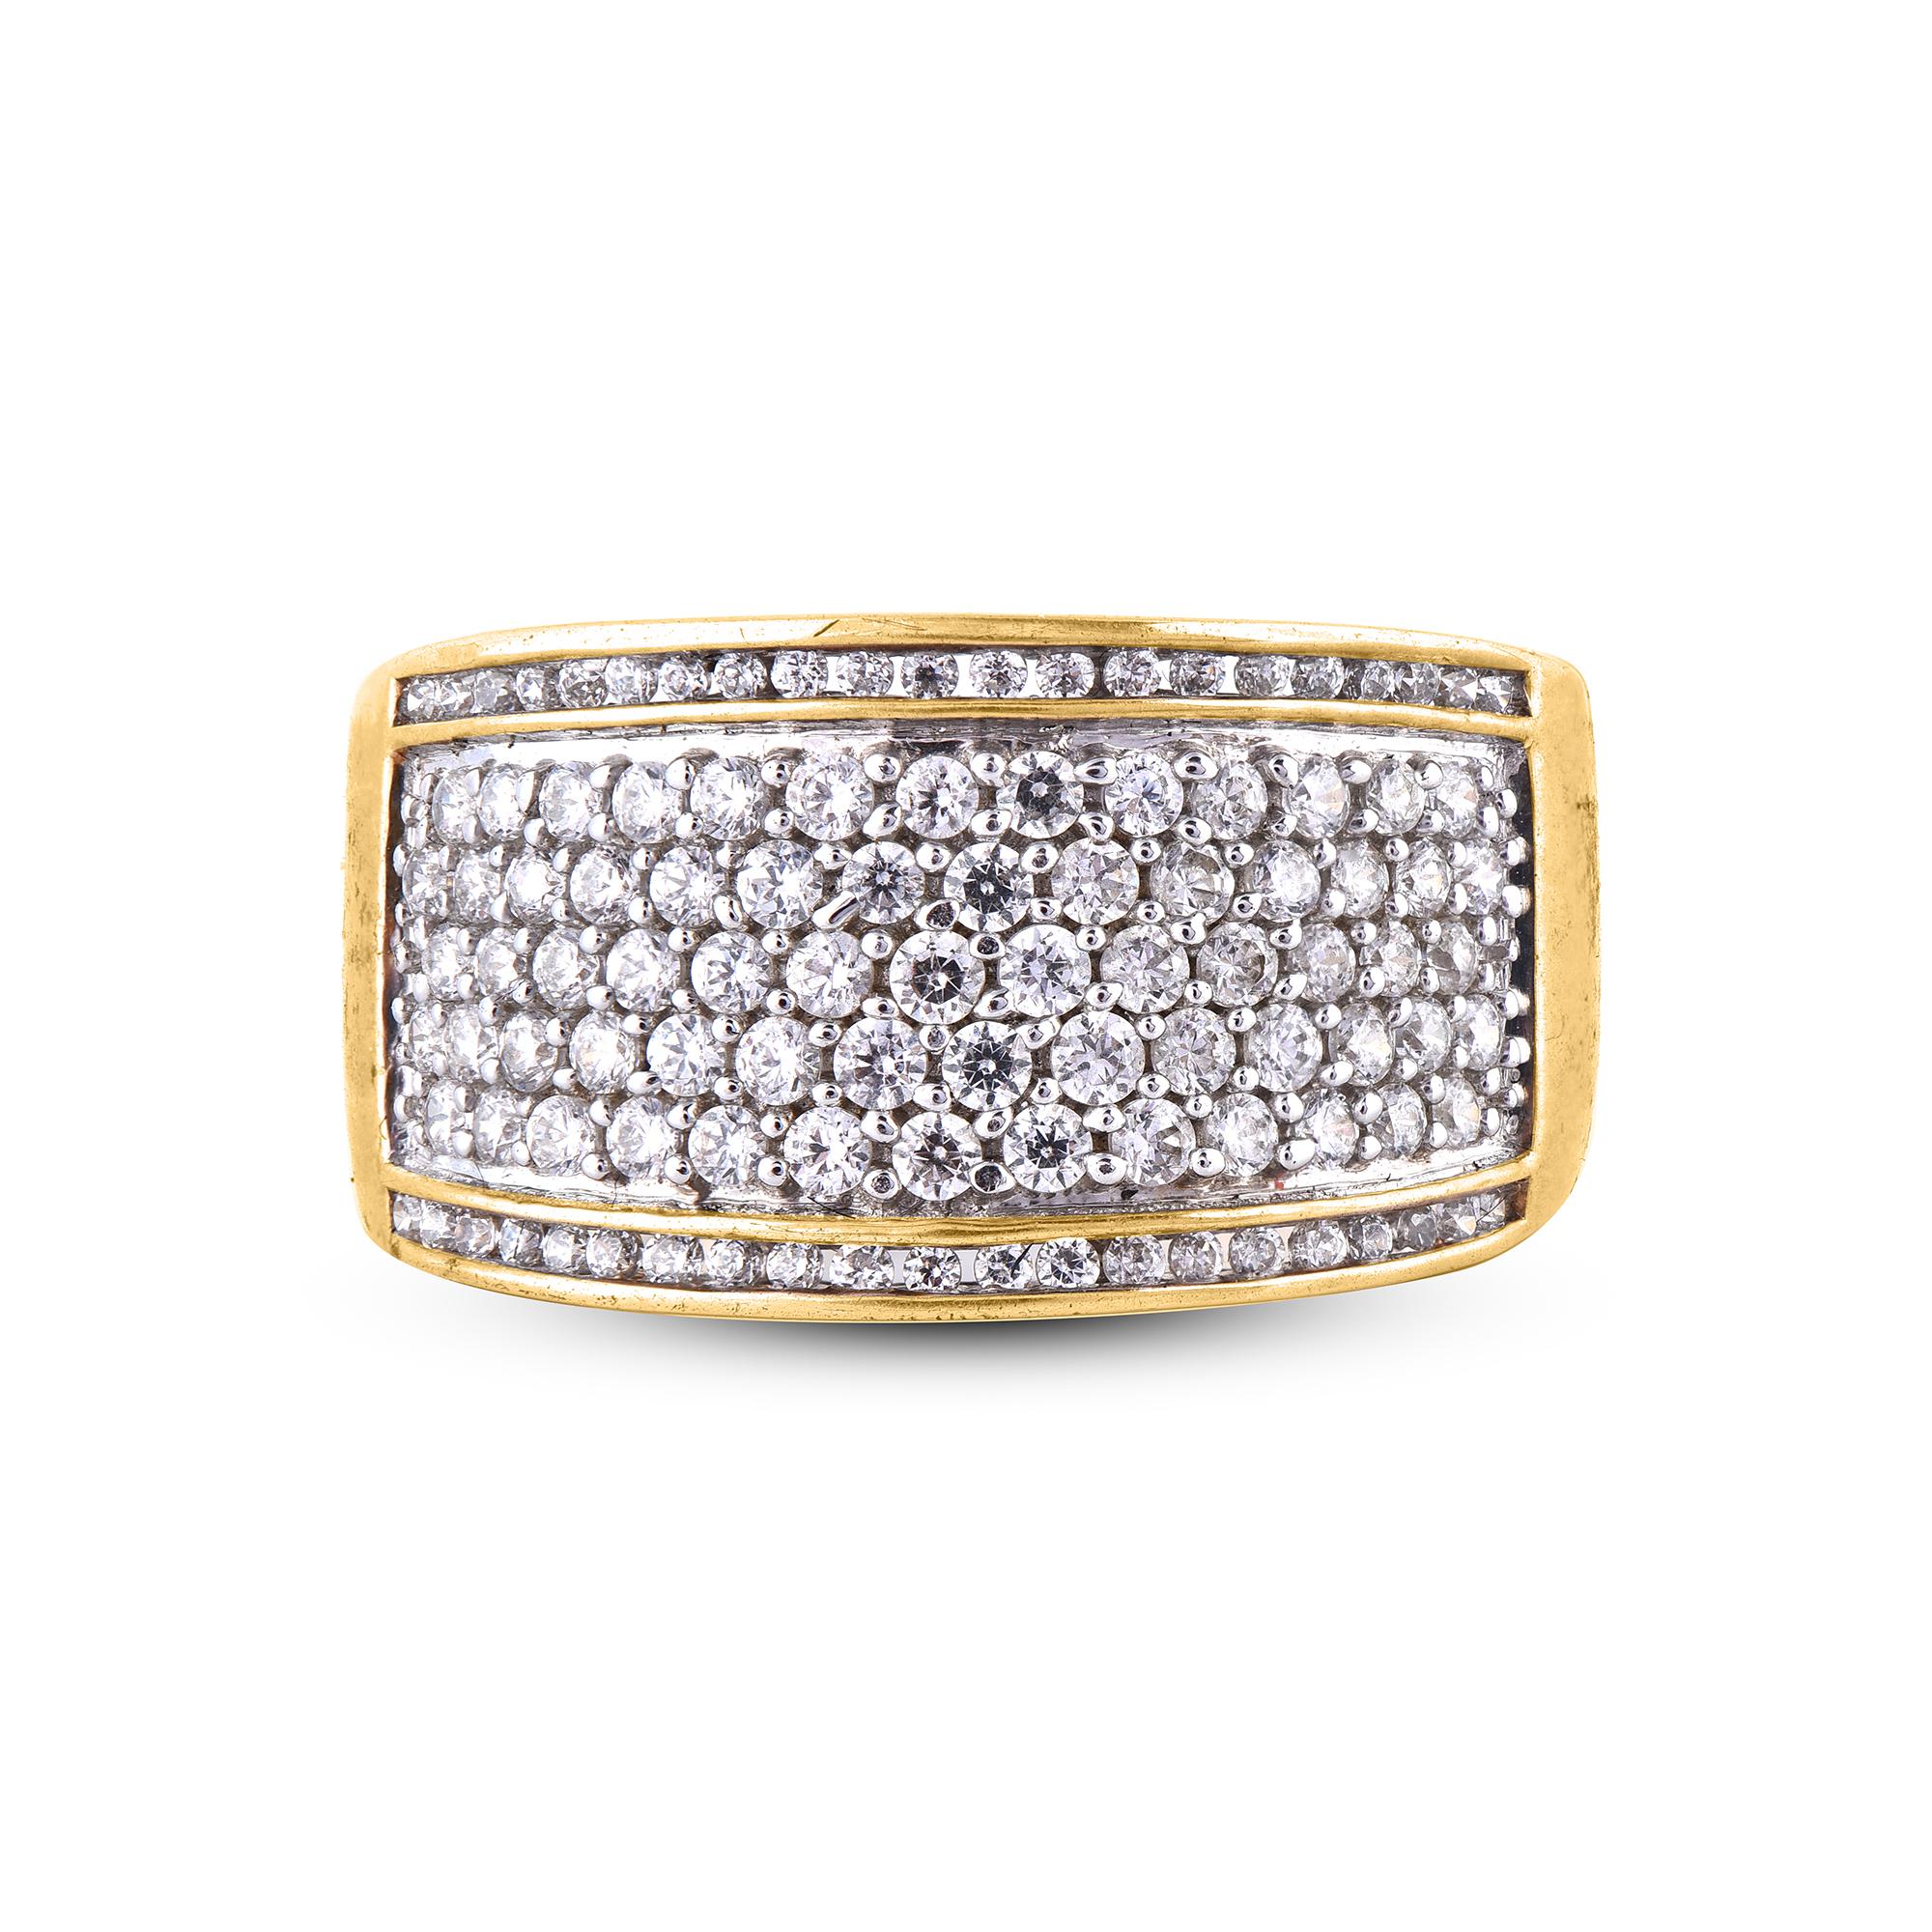 Express your love for her in the most classic way with this band ring. This beautiful ring features shimmering 109 brilliant cut and single cut diamonds studded in pave and channel setting. Crafted in 14 karat yellow gold. The total diamond weight